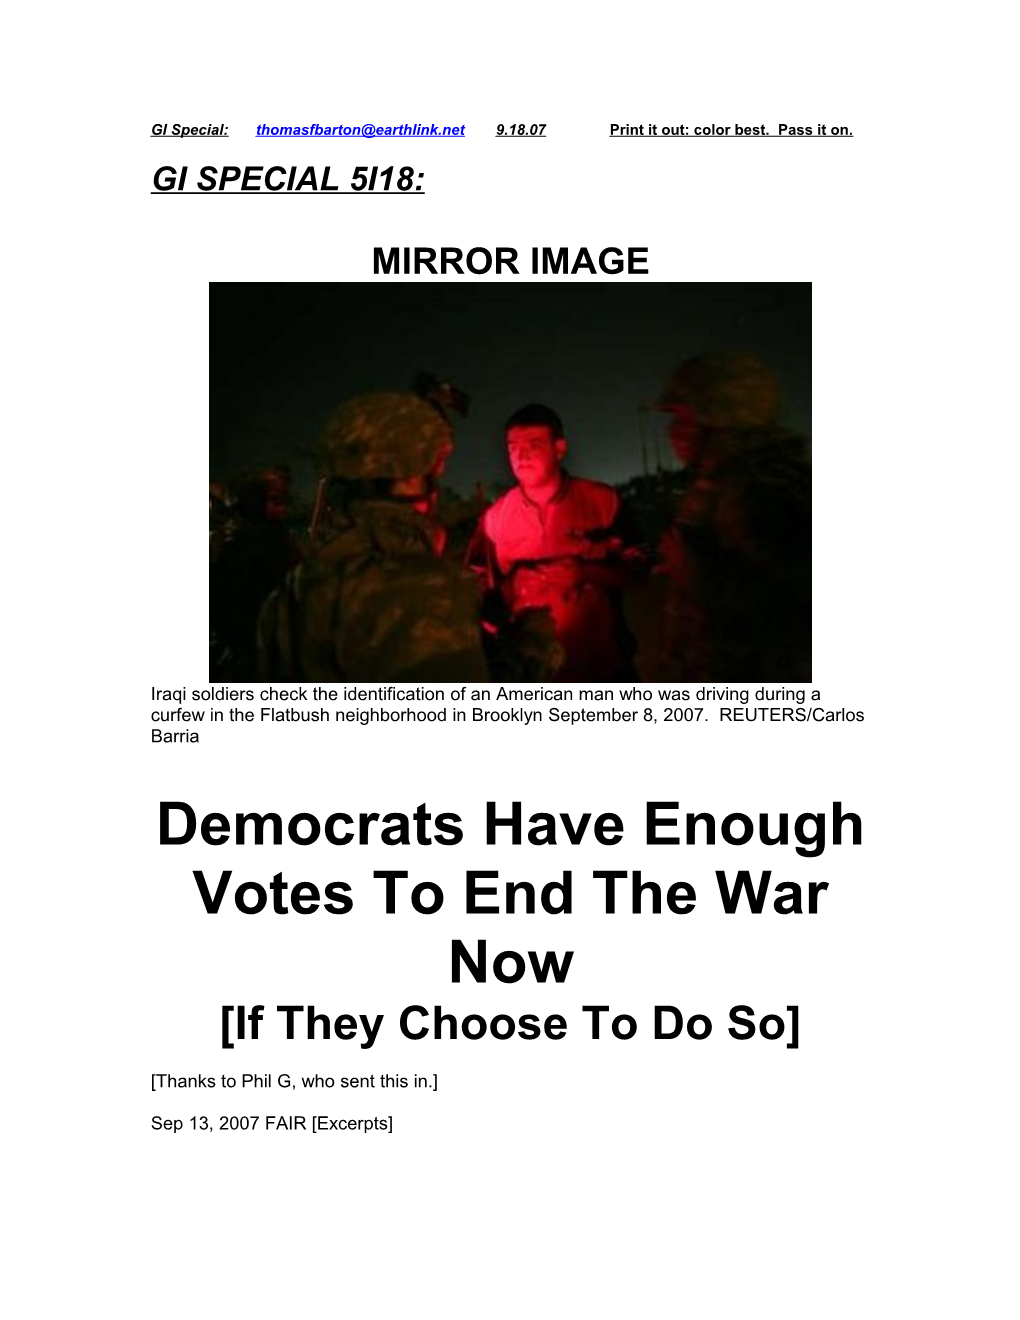 Democrats Have Enough Votes to End the War Now